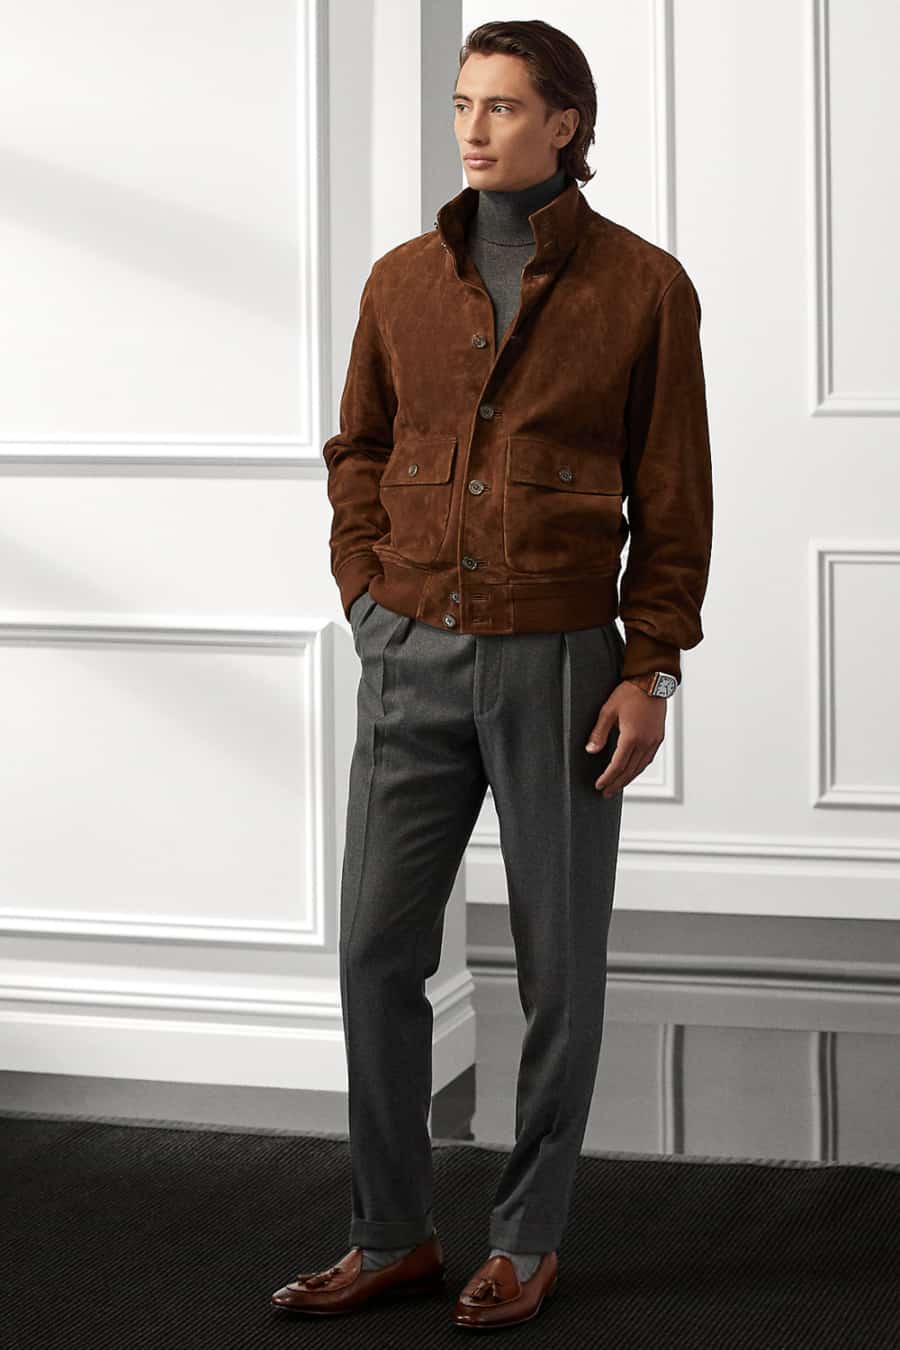 Men's grey wool trousers, charcoal turtleneck, brown suede bomber jacket and brown leather loafers outfit